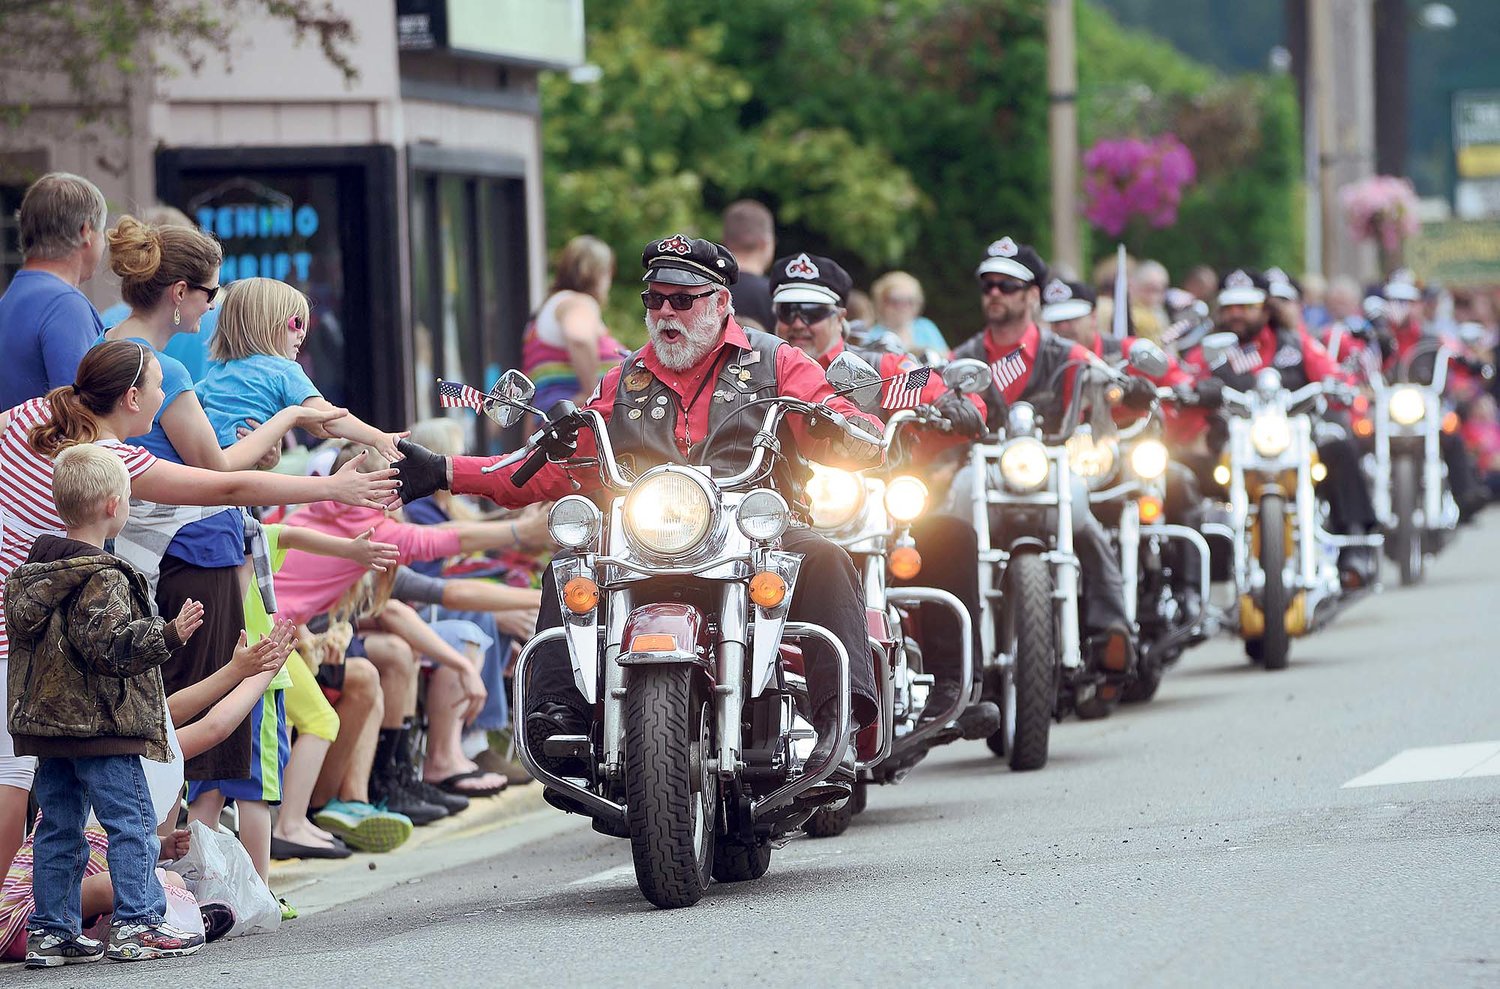 The Tenino Motorcycle Drill Team warms up the crowd prior to the start of a prior Oregon Trail Days parade.